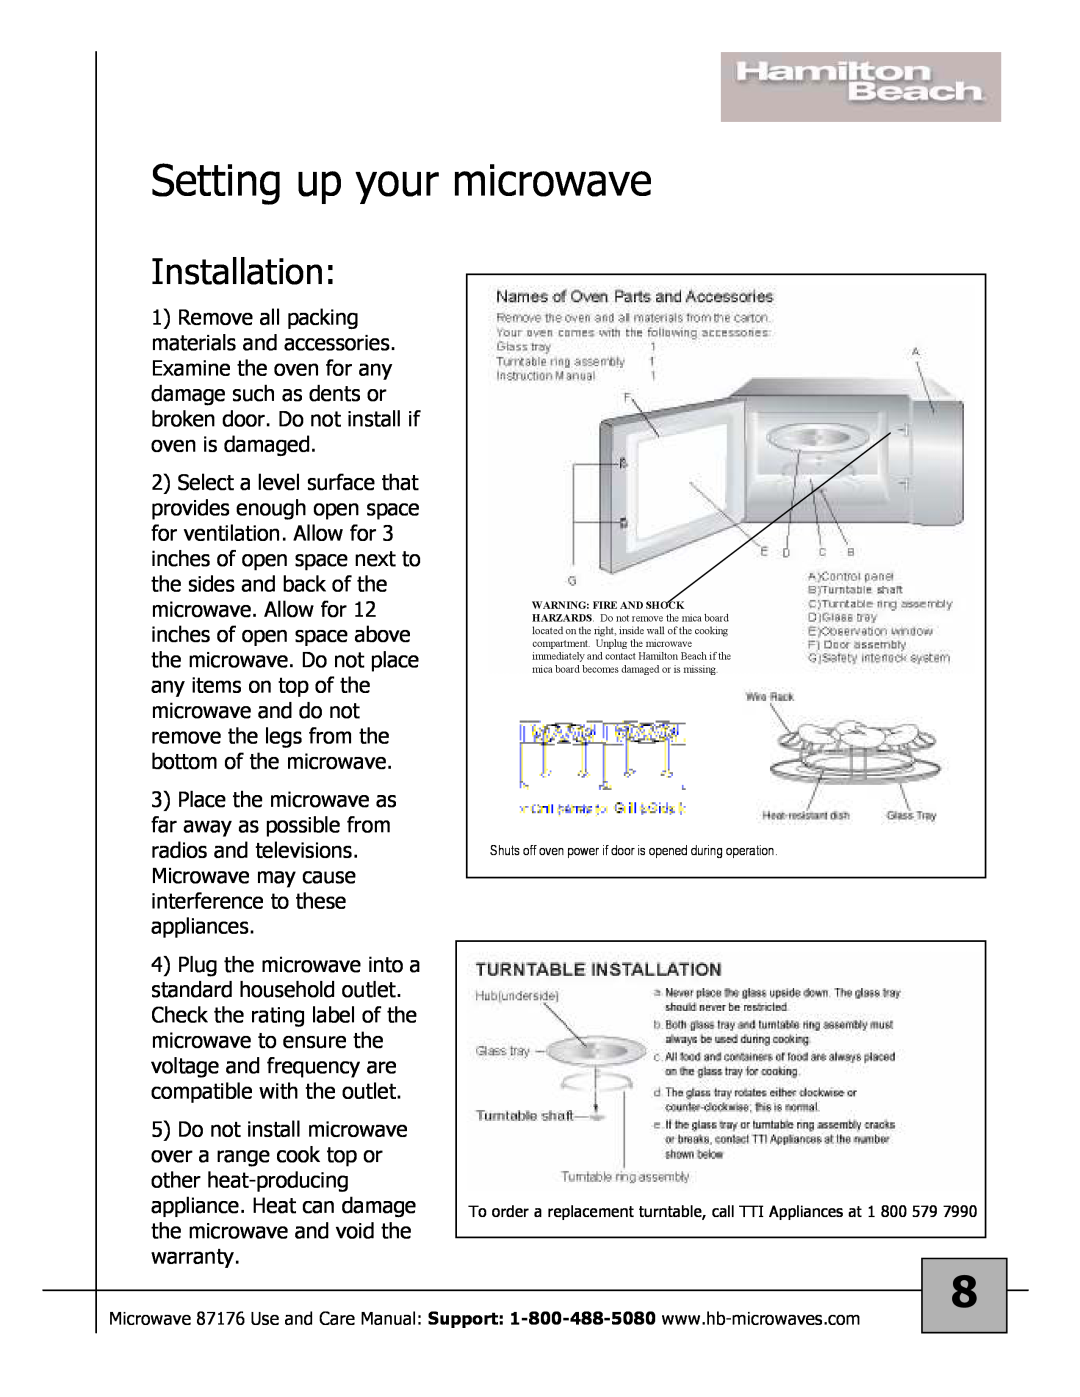 Hamilton Beach 87176 owner manual Setting up your microwave, Installation 